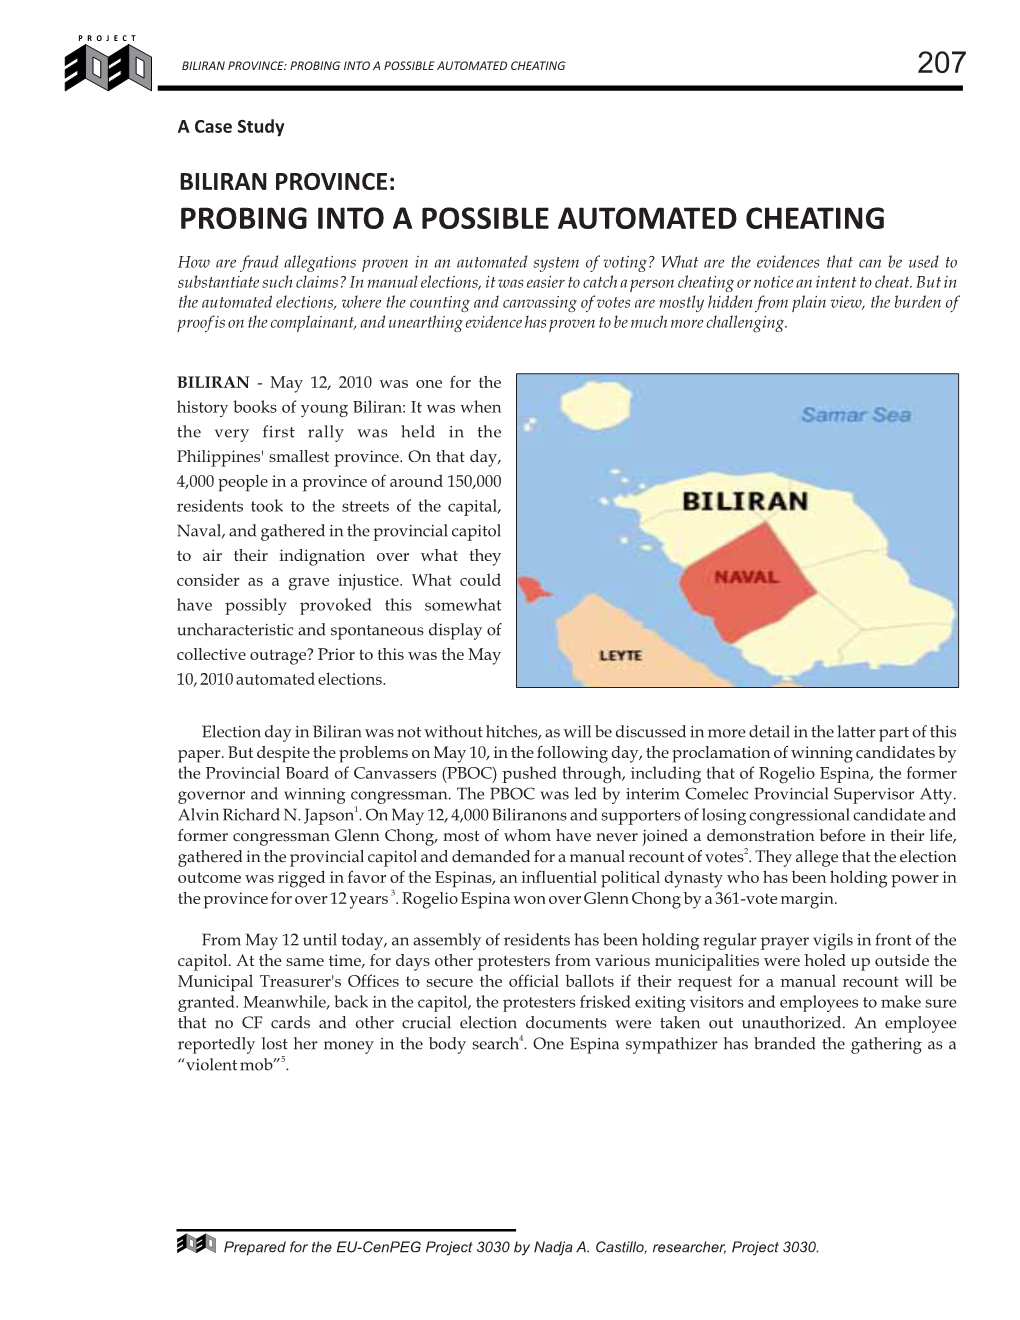 Biliran Province: Probing Into a Possible Automated Cheating 207